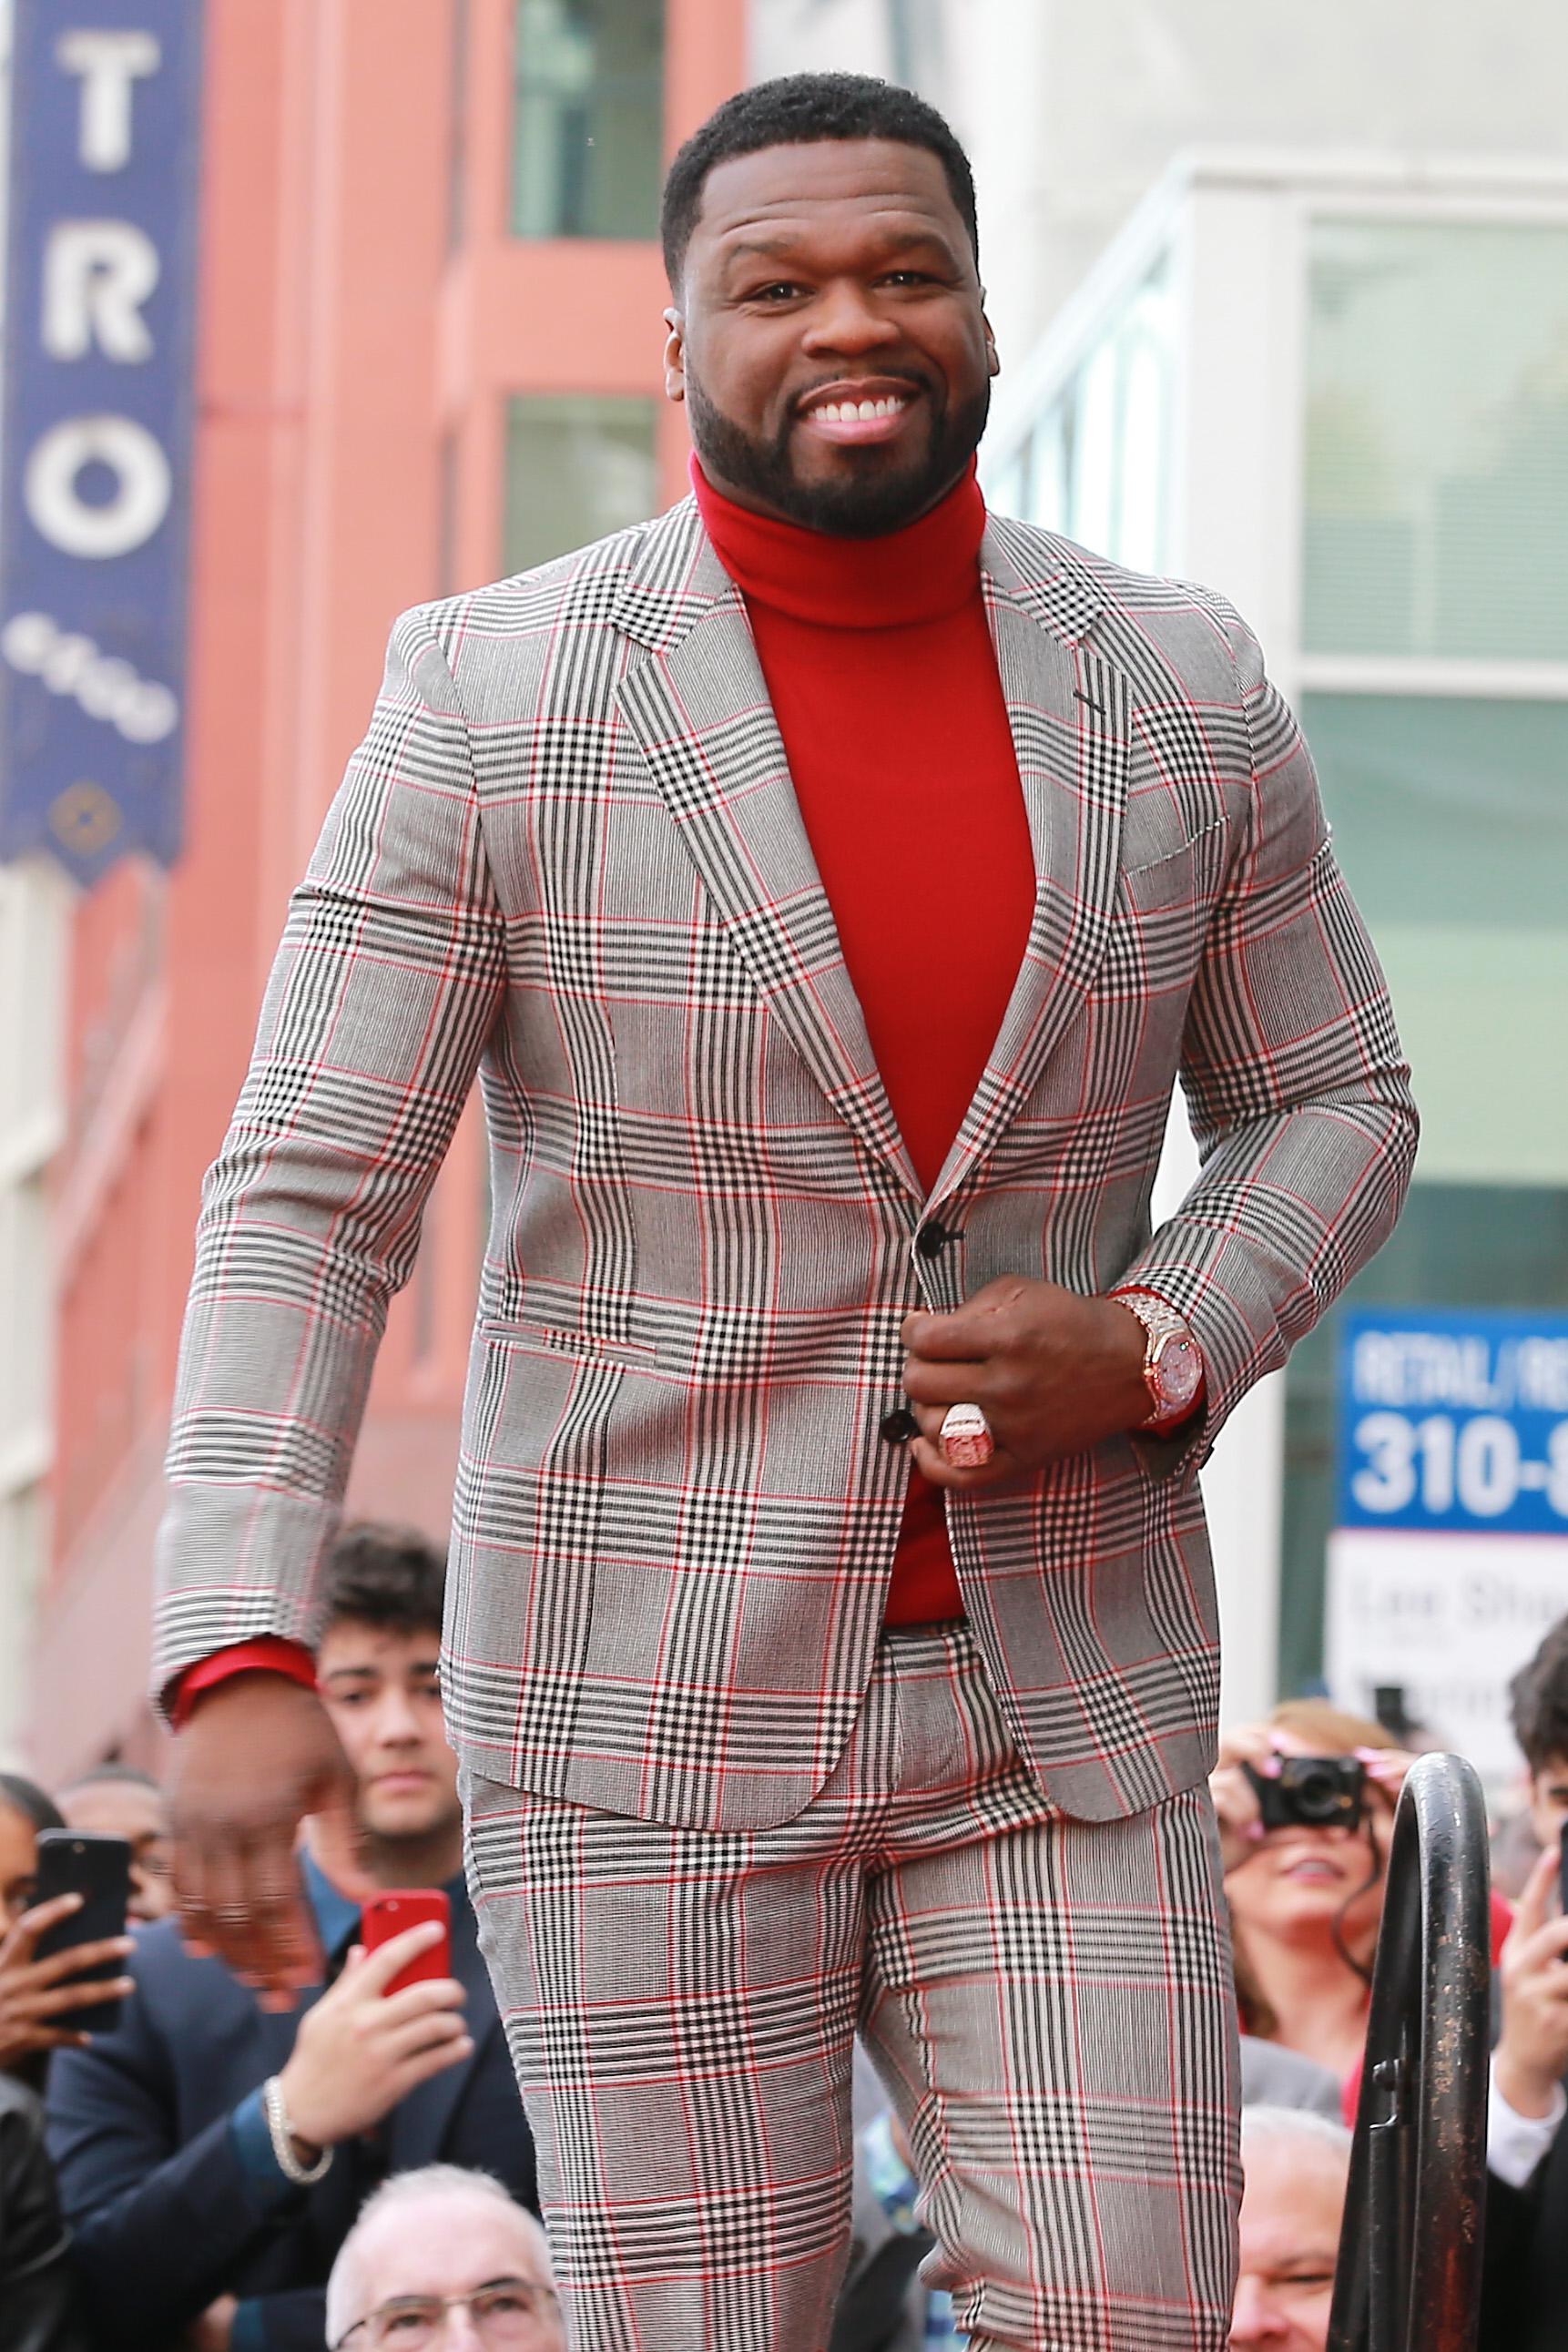 50 Cent at a ceremony honoring him with a star on the Hollywood Walk of Fame on January 30, 2020, in California. | Source: Getty Images